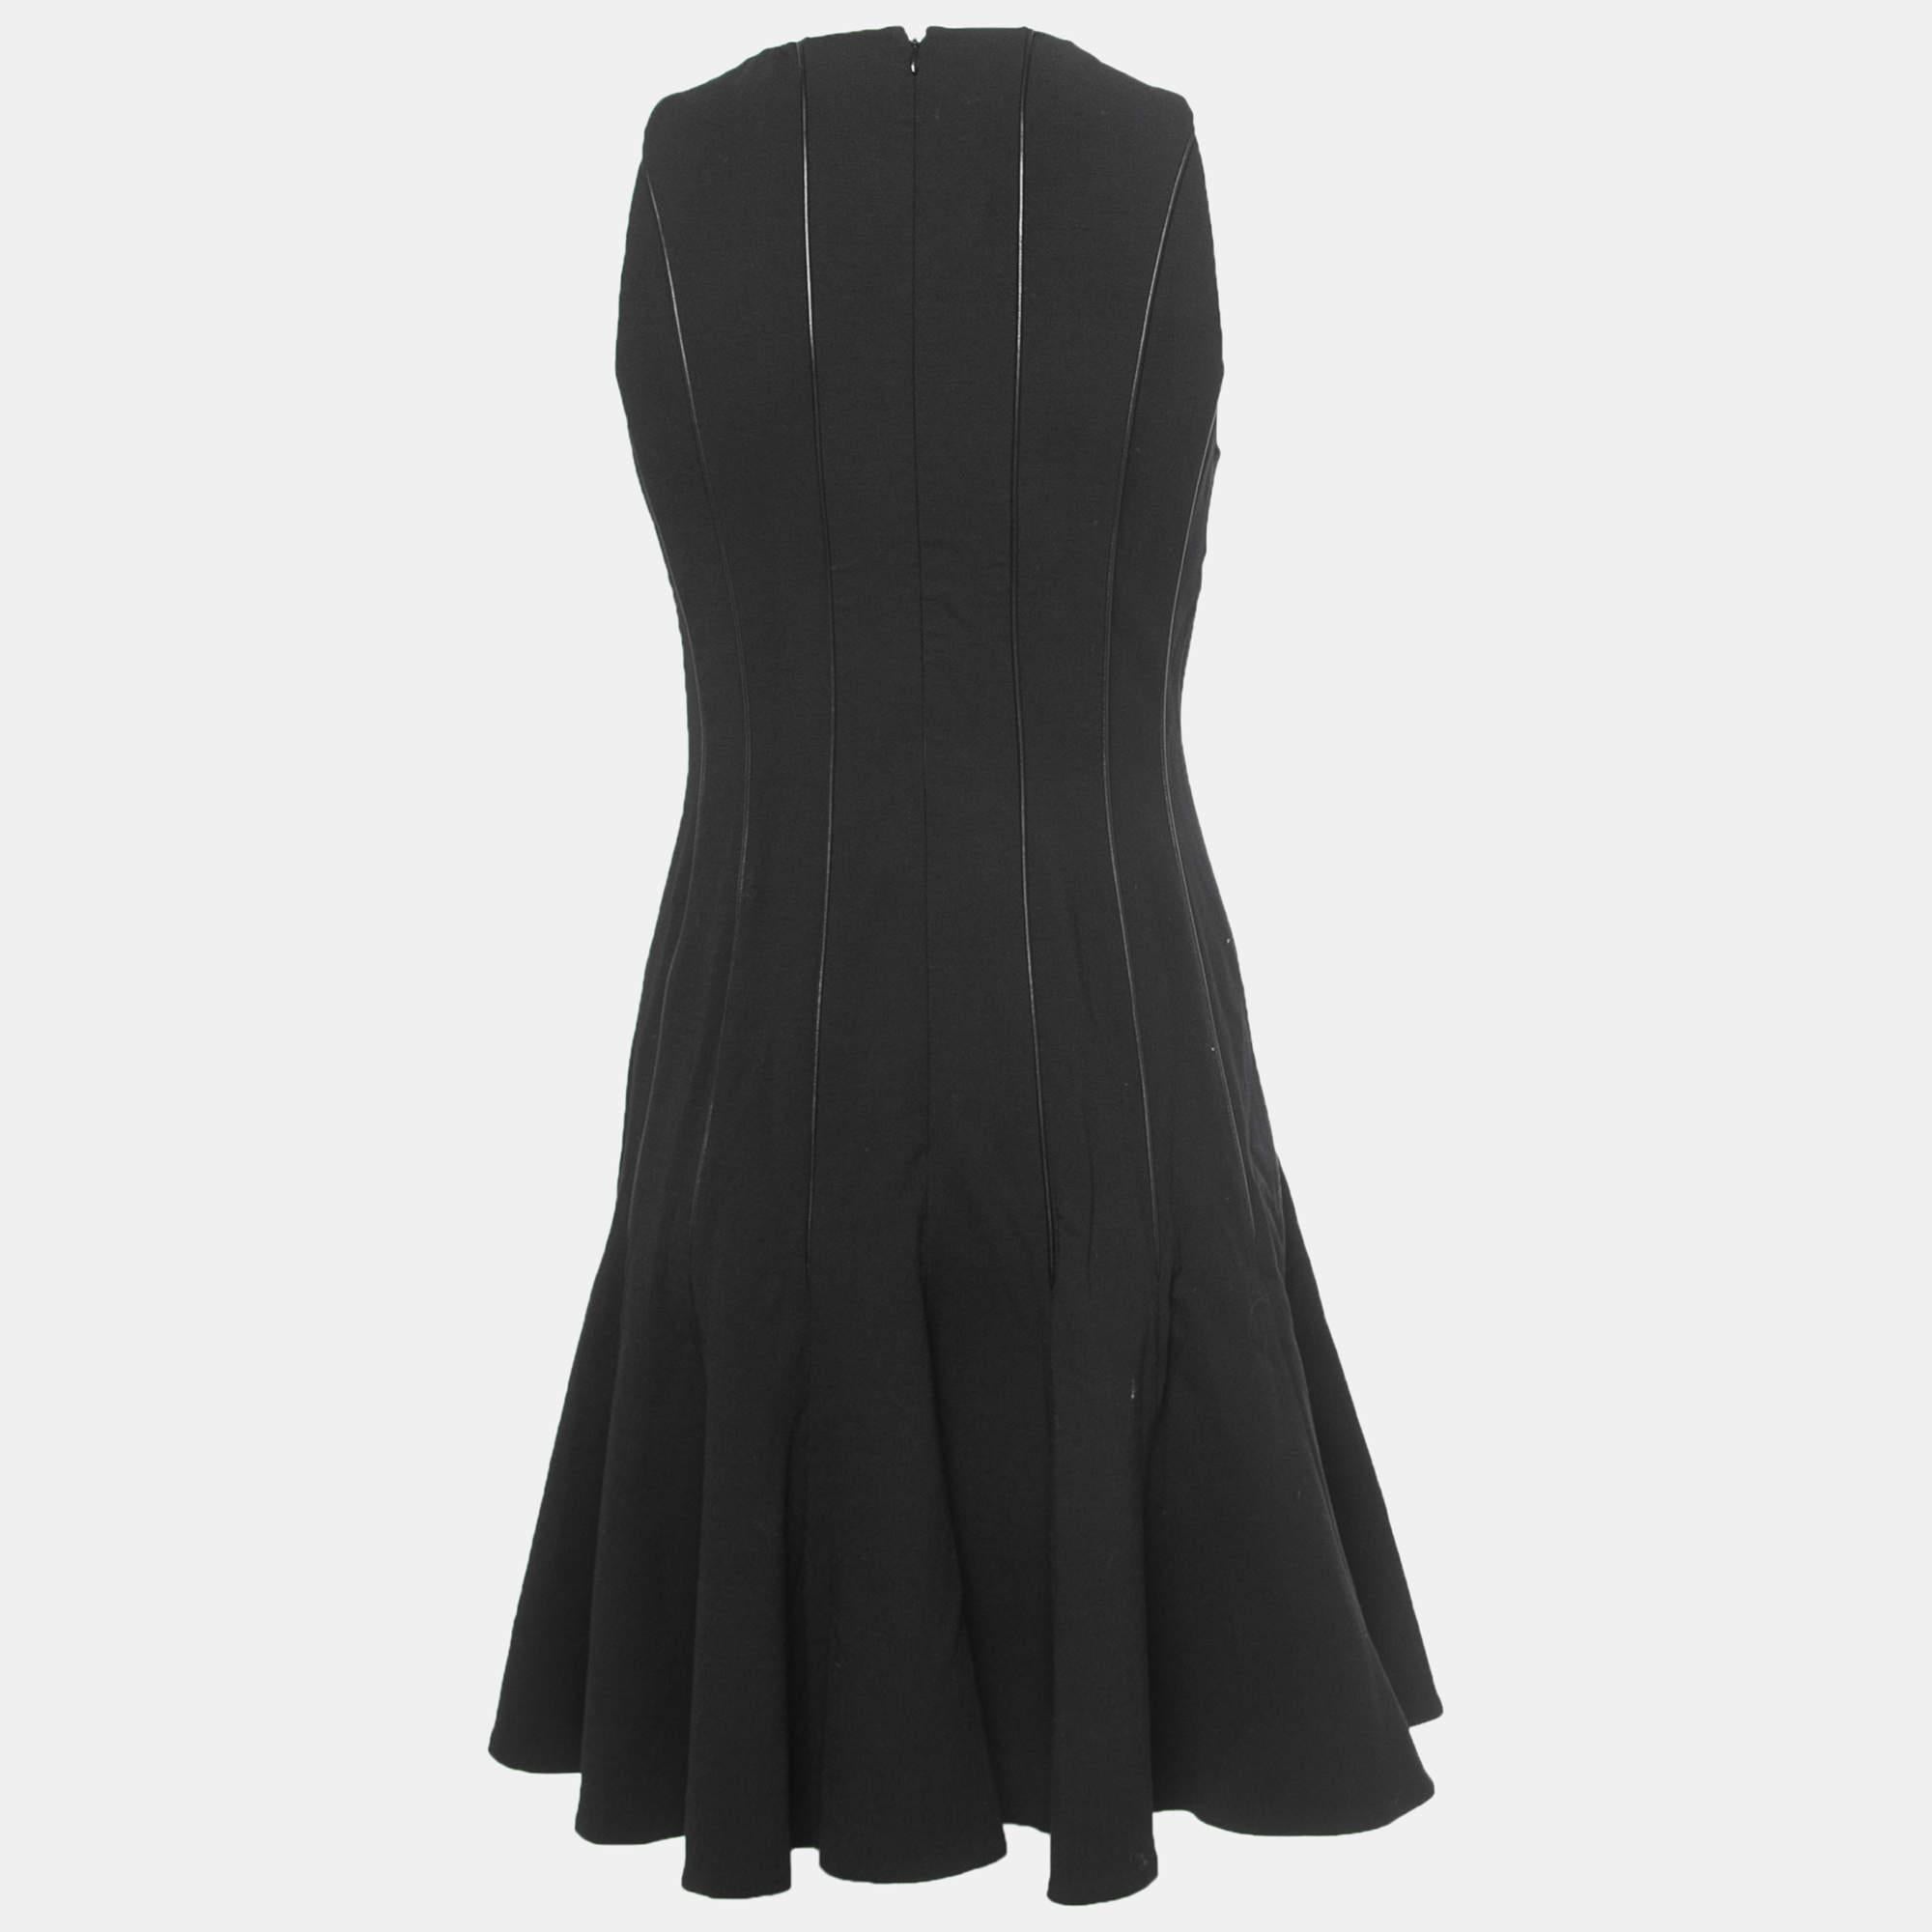 Make a luxe fashion statement by wearing this designer dress. It is tailored using fine fabric into a flattering silhouette.

